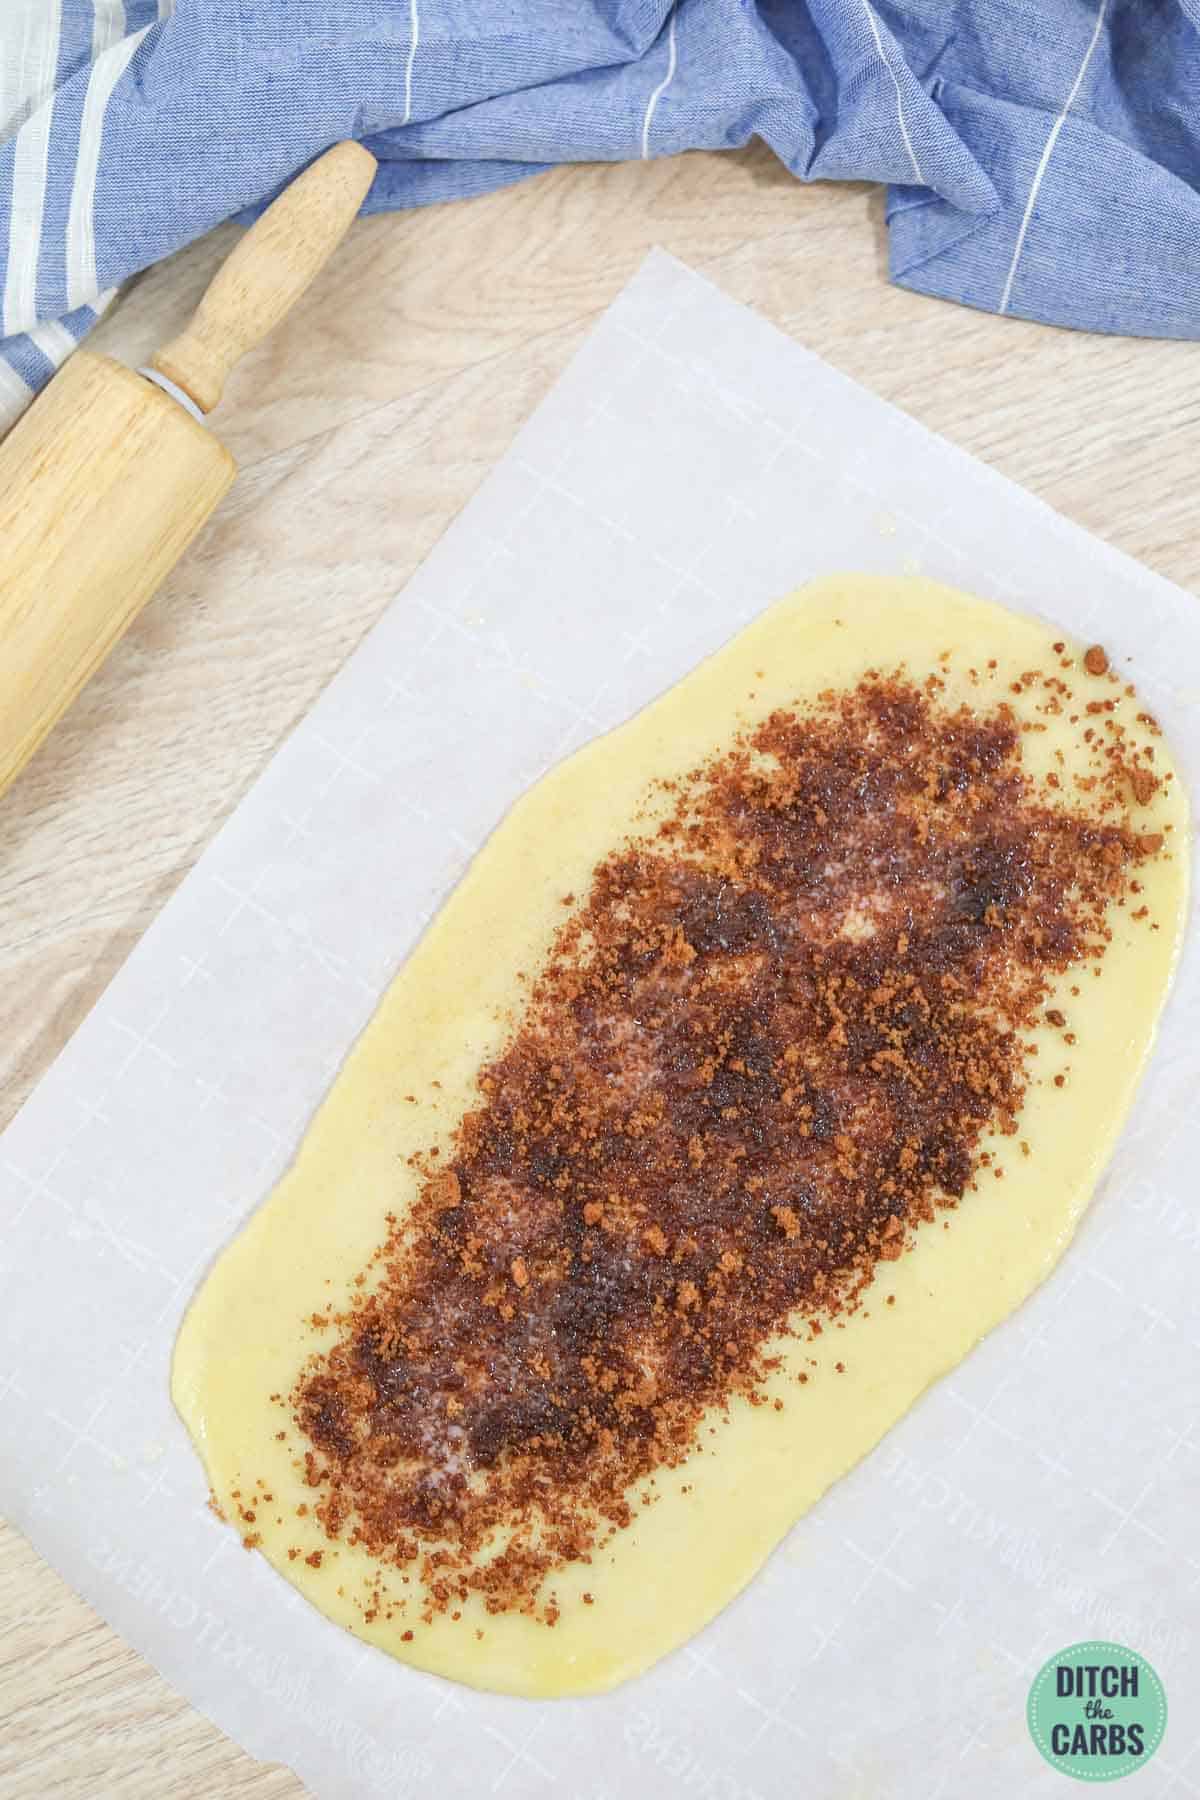 Keto dough rolled out with cinnamon sprinkled on top